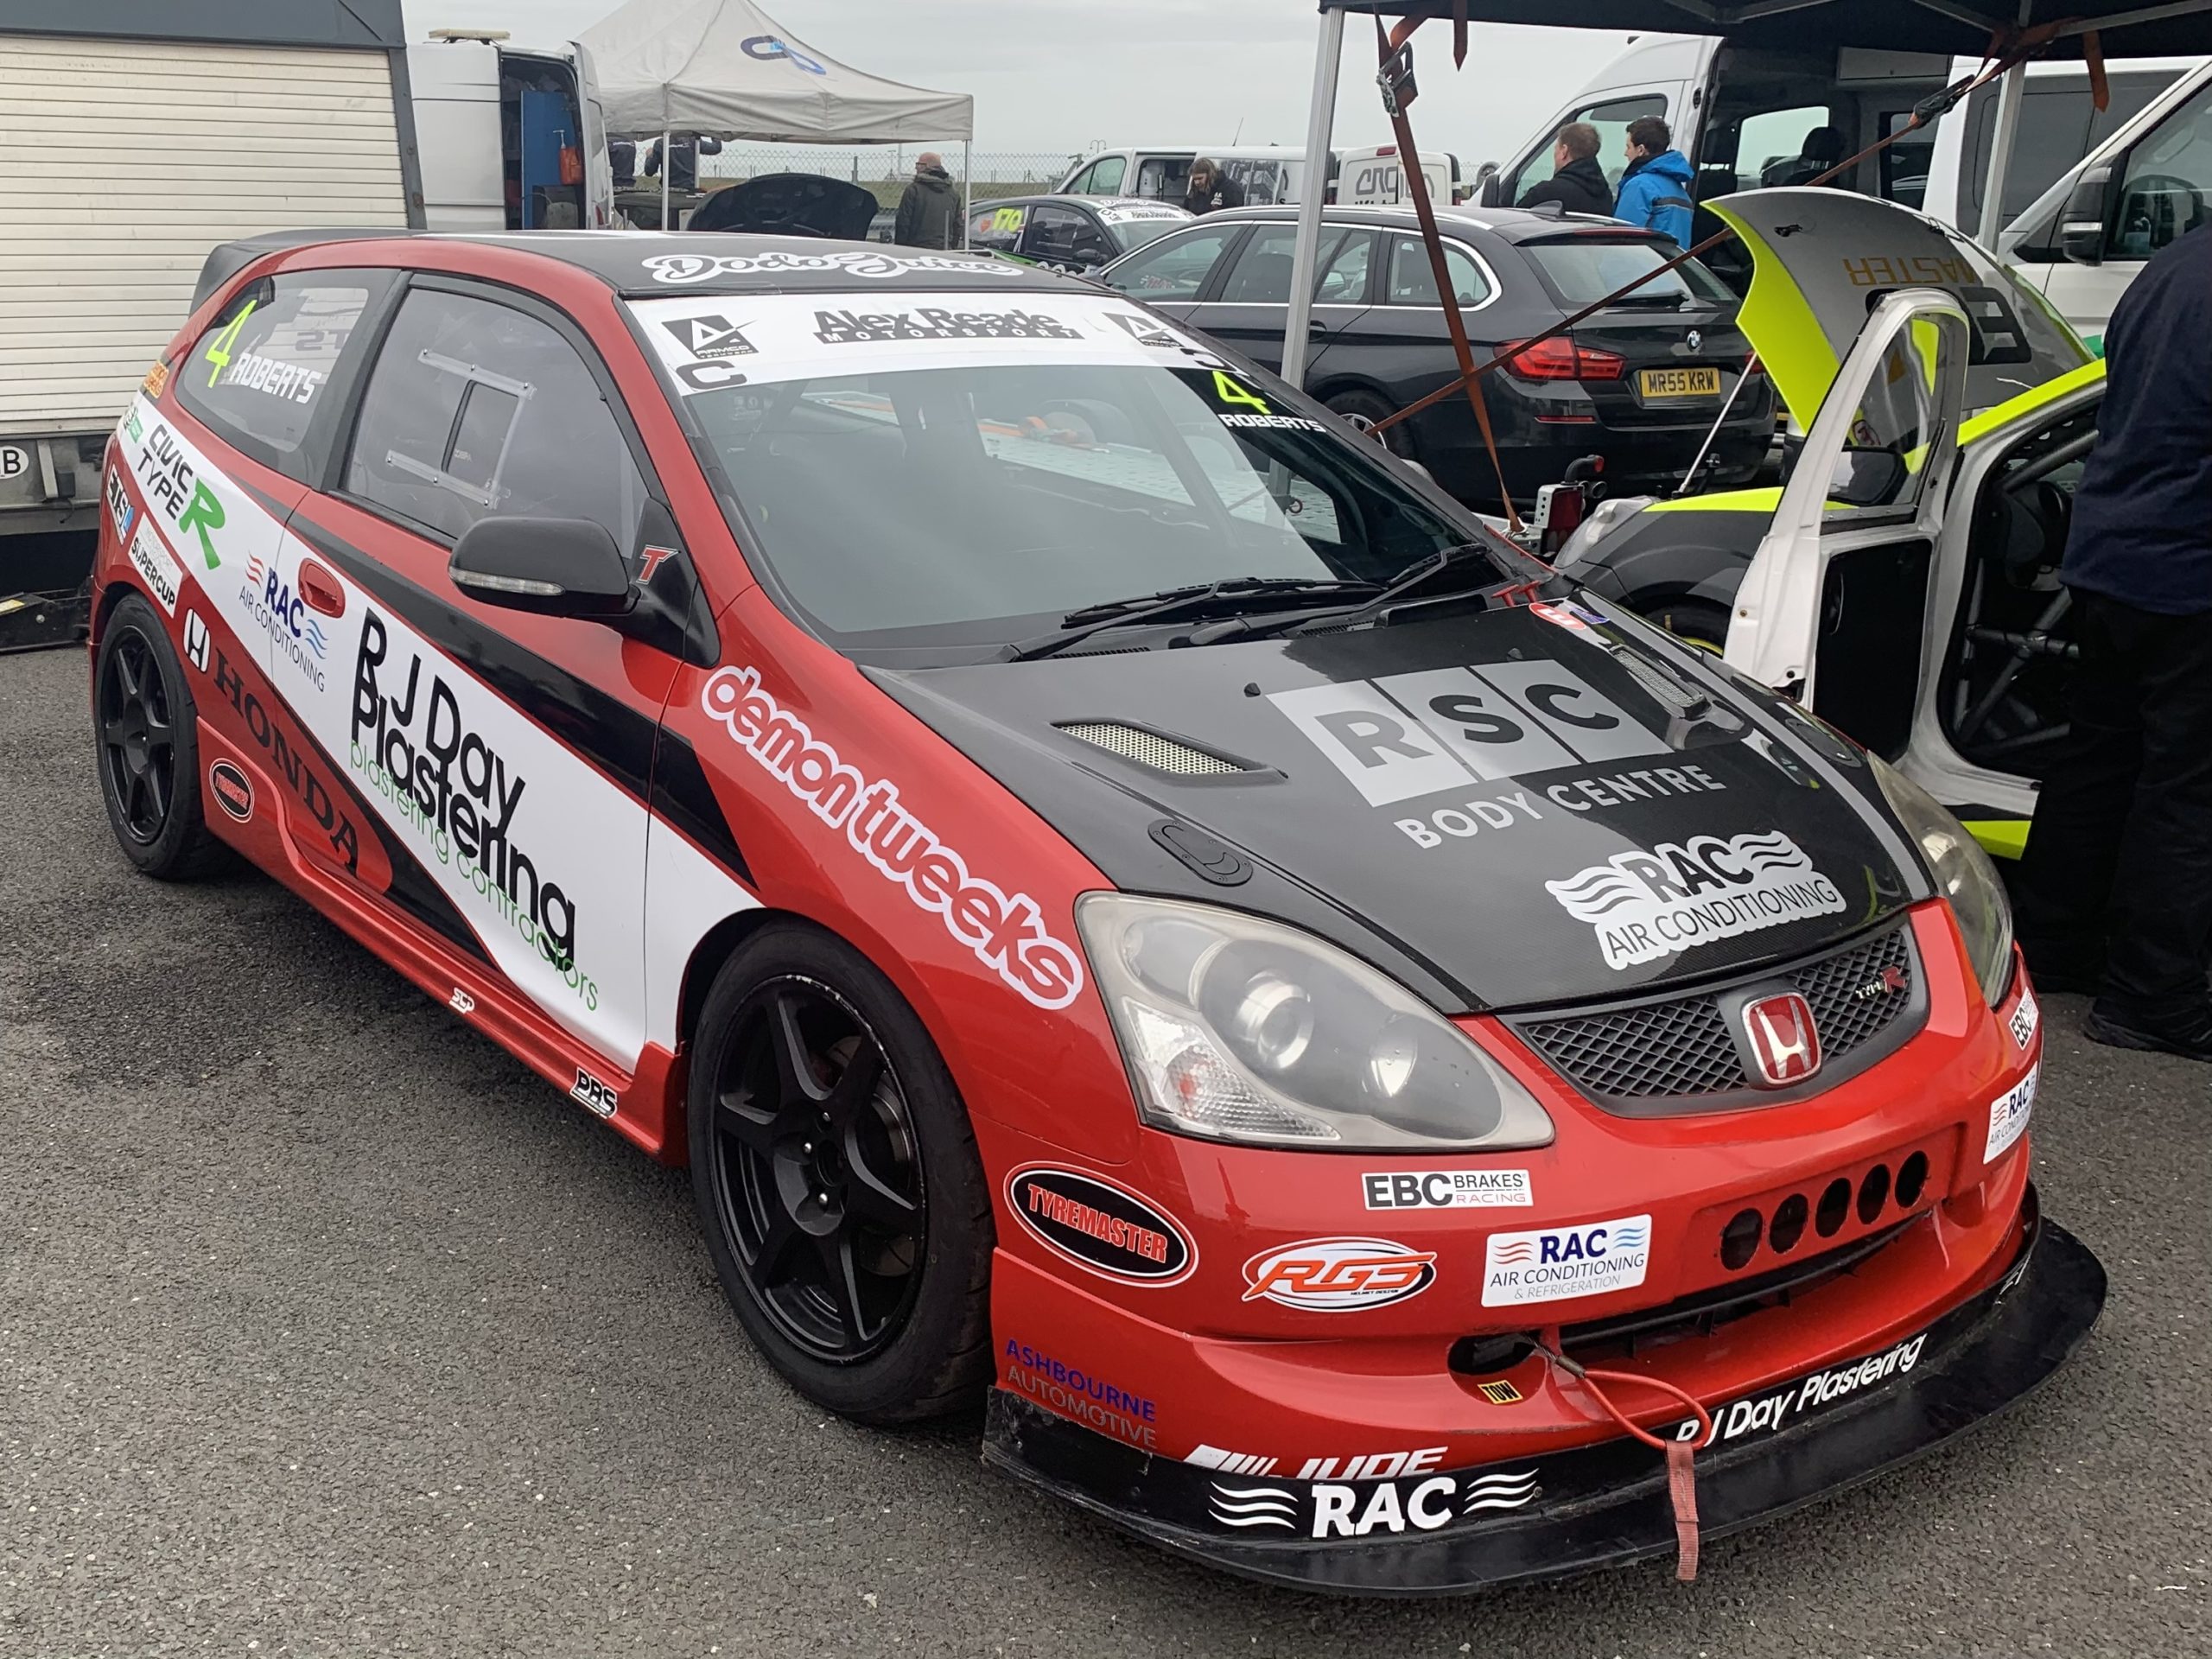 RP-X-Equipped MSVT Trackday Championship Racer Secures Outright Win at Snetterton